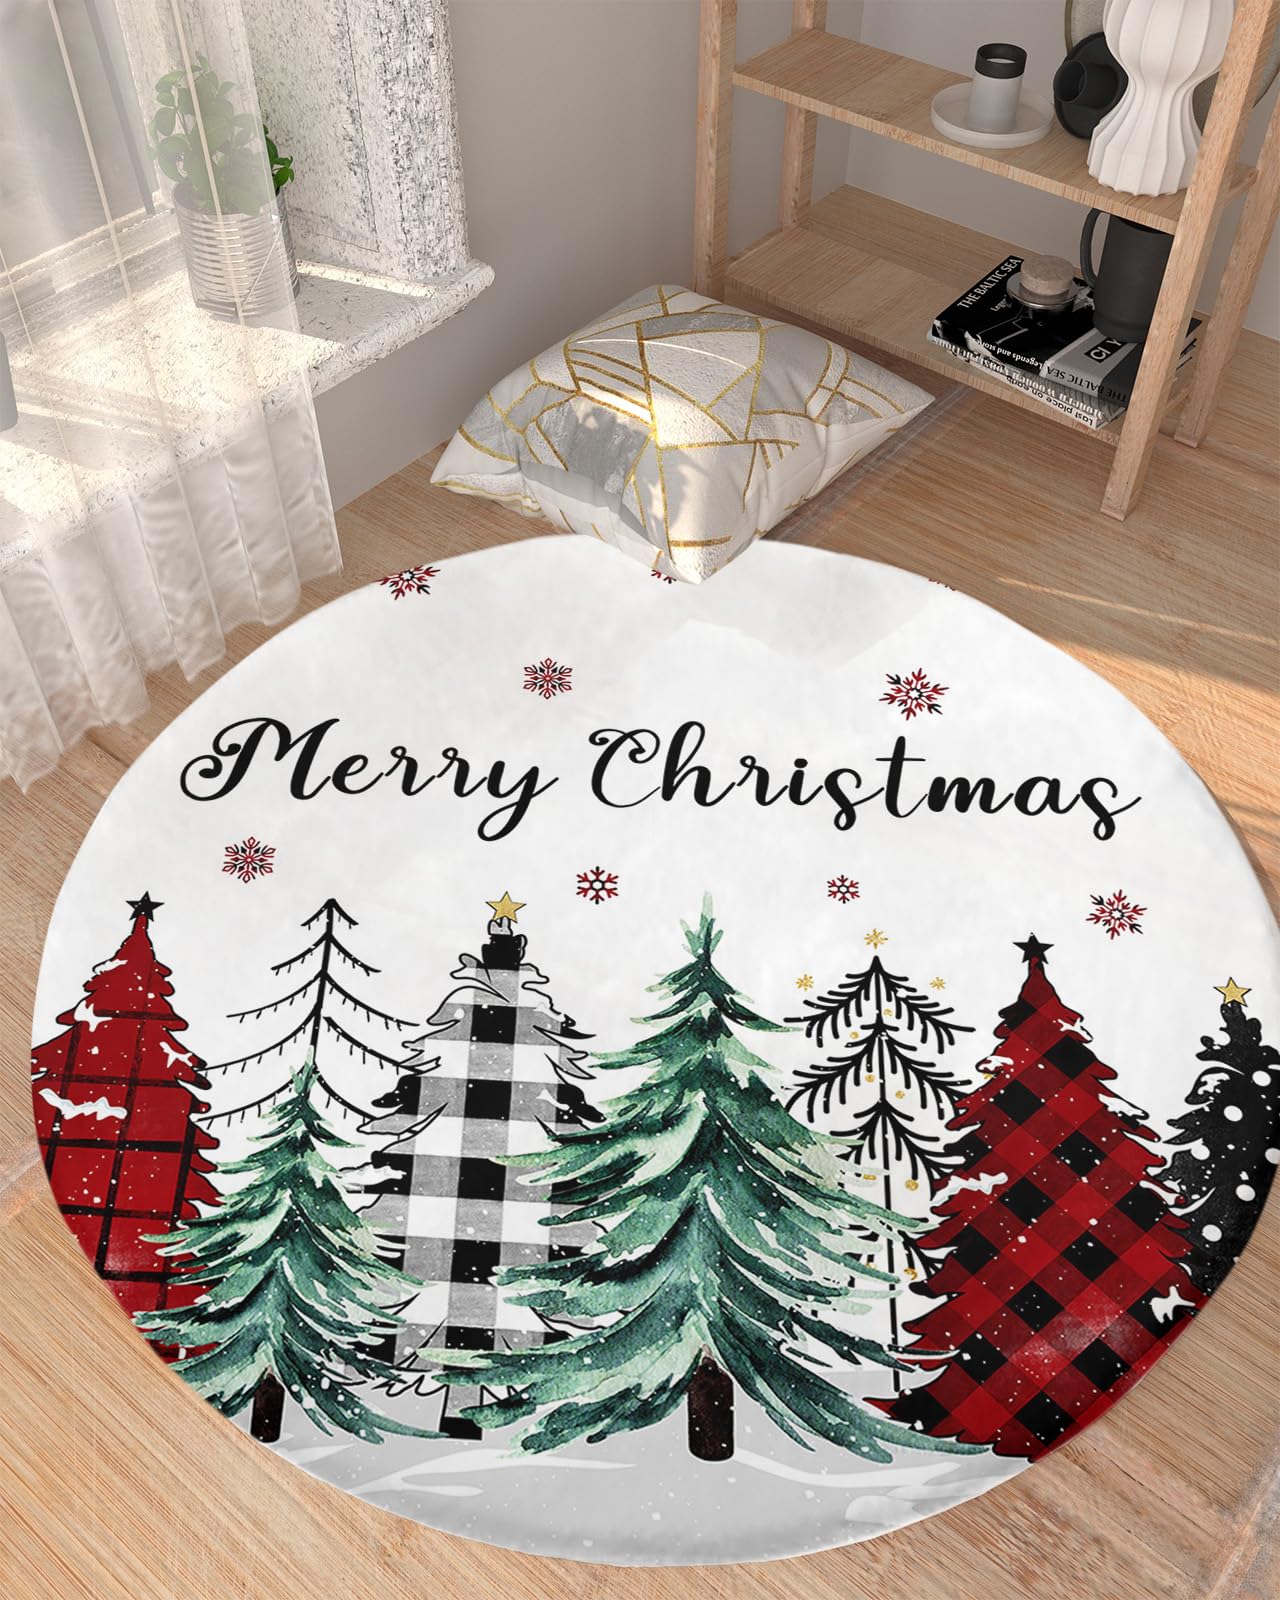 Buffalo Plaid Tree Fluffy Round Area Rug Carpets 3.3ft, Plush Shaggy Carpet Soft Circular Rugs, Non-Slip Fuzzy Accent Floor Mat for Living Room Bedroom Nursery Decor Christmas Red Green Black Dots